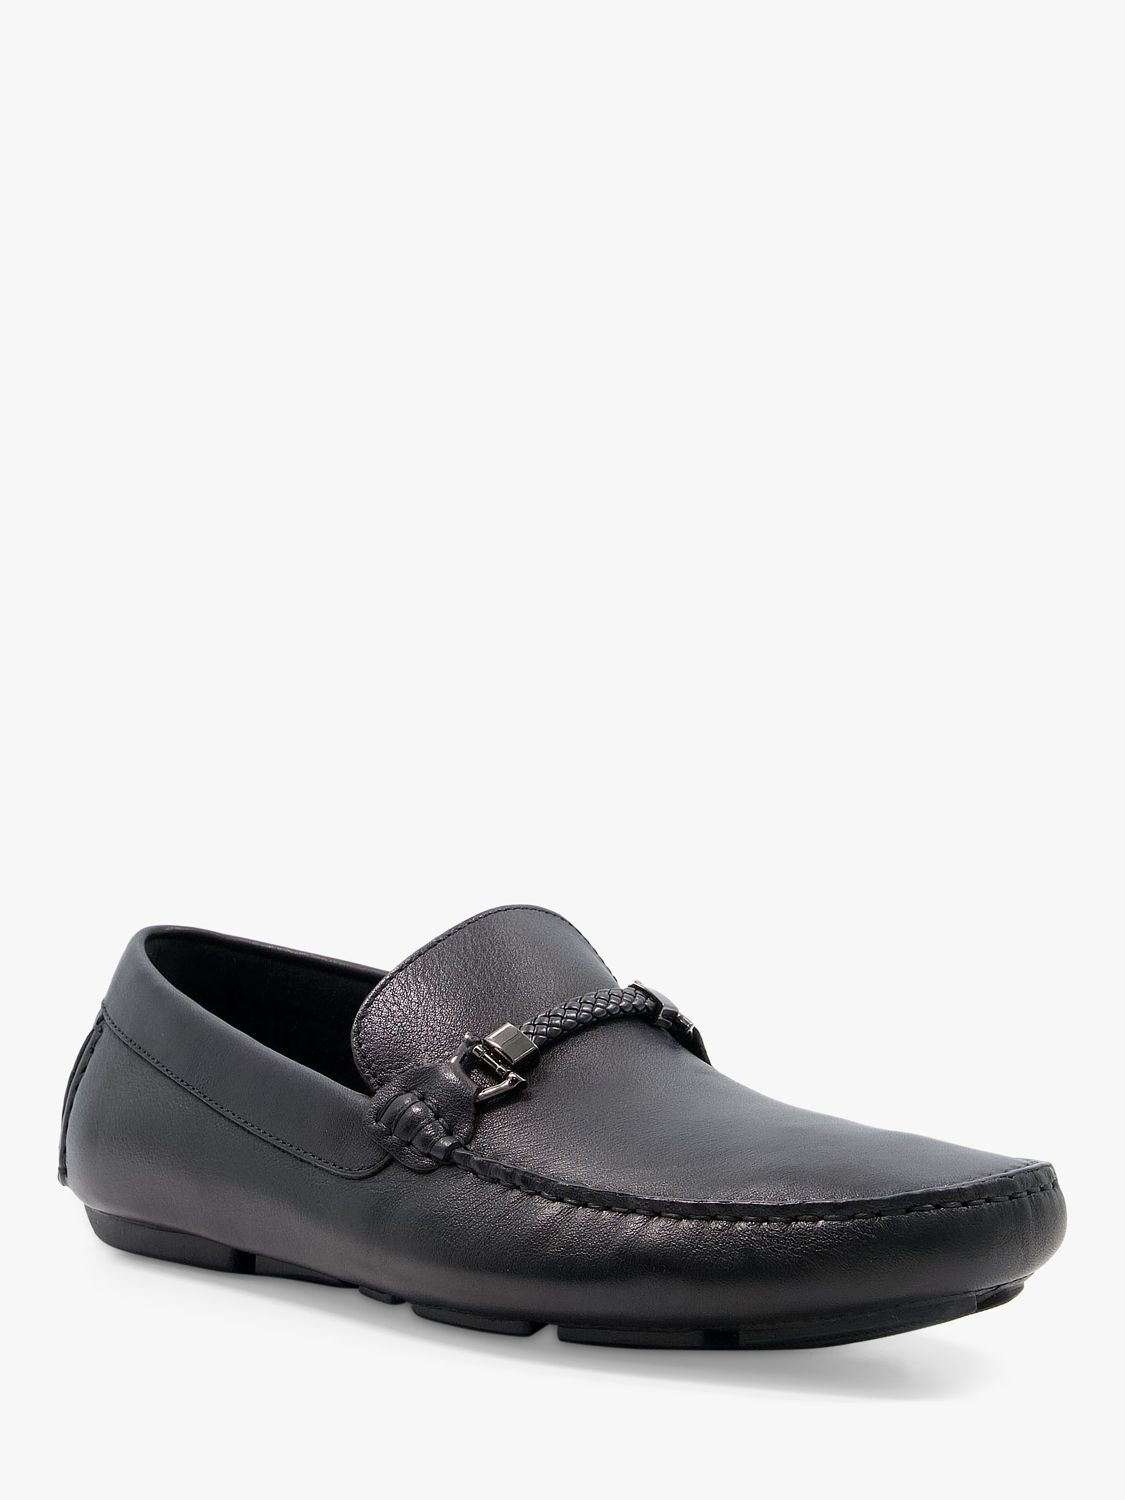 Dune Wide Fit Woven Trim Driver Beacons Loafers, Black at John Lewis ...